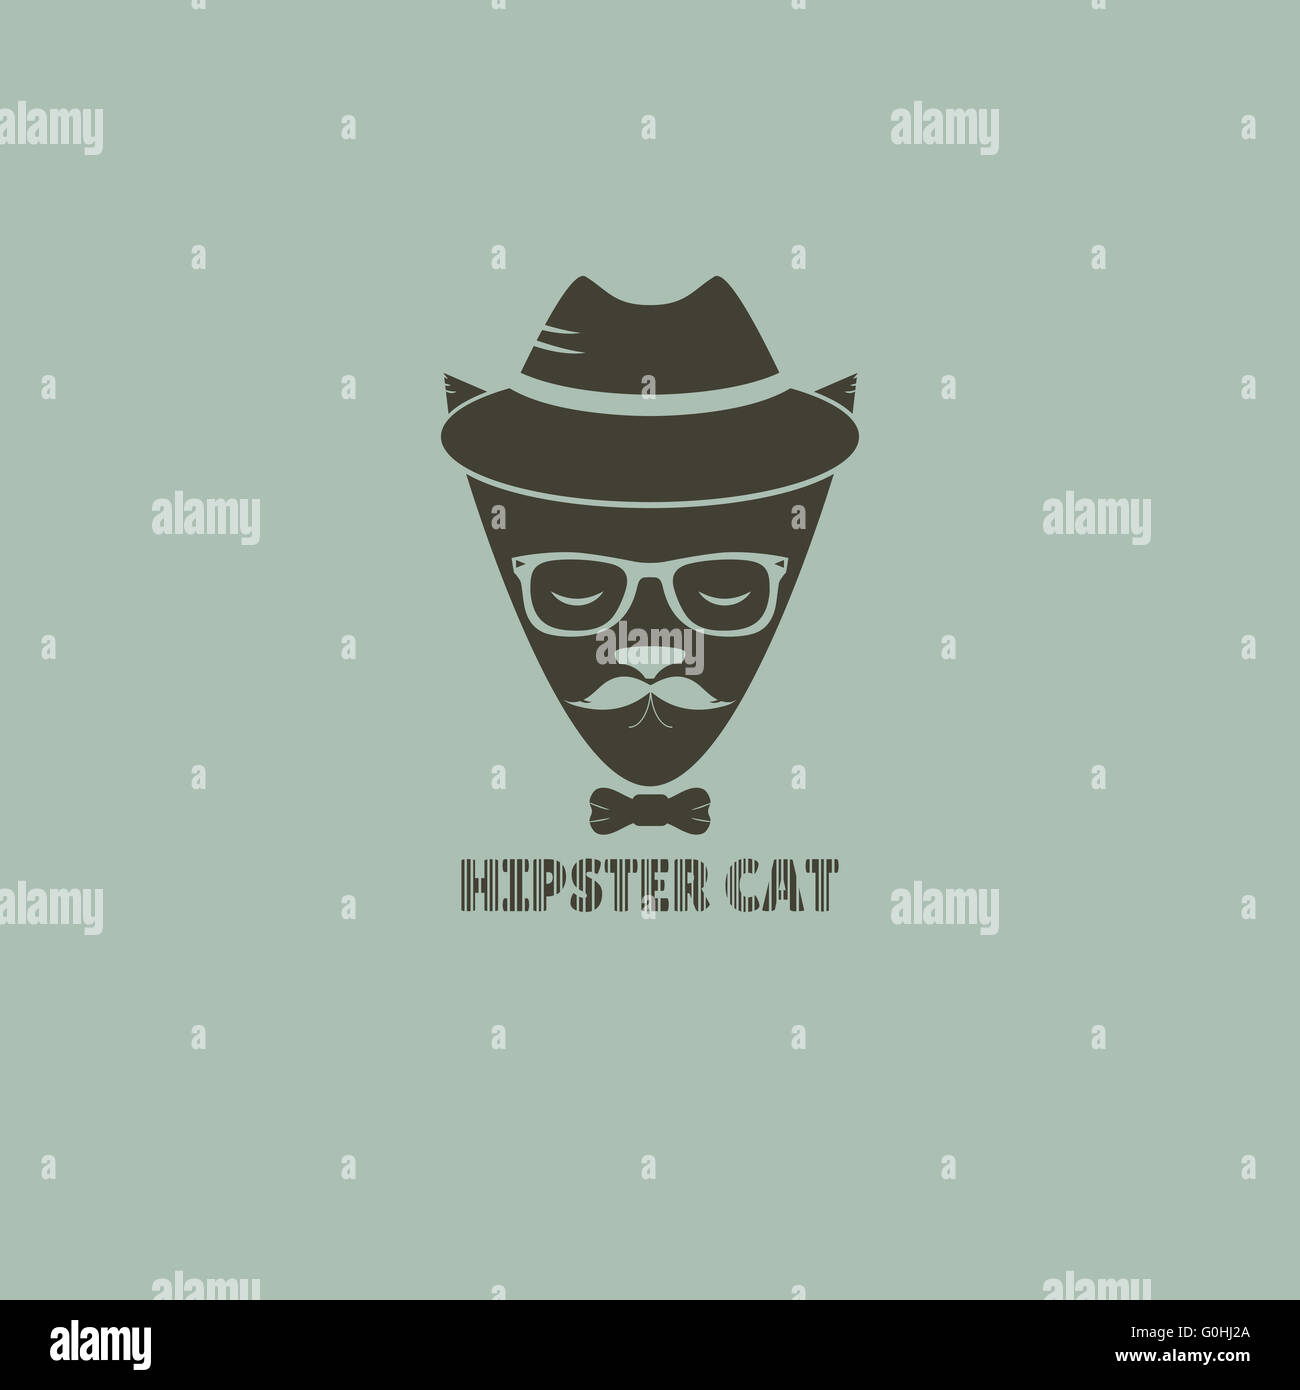 Silhouette hipster cat in a hat and sunglasses. Vector illustration hipster cat Stock Photo